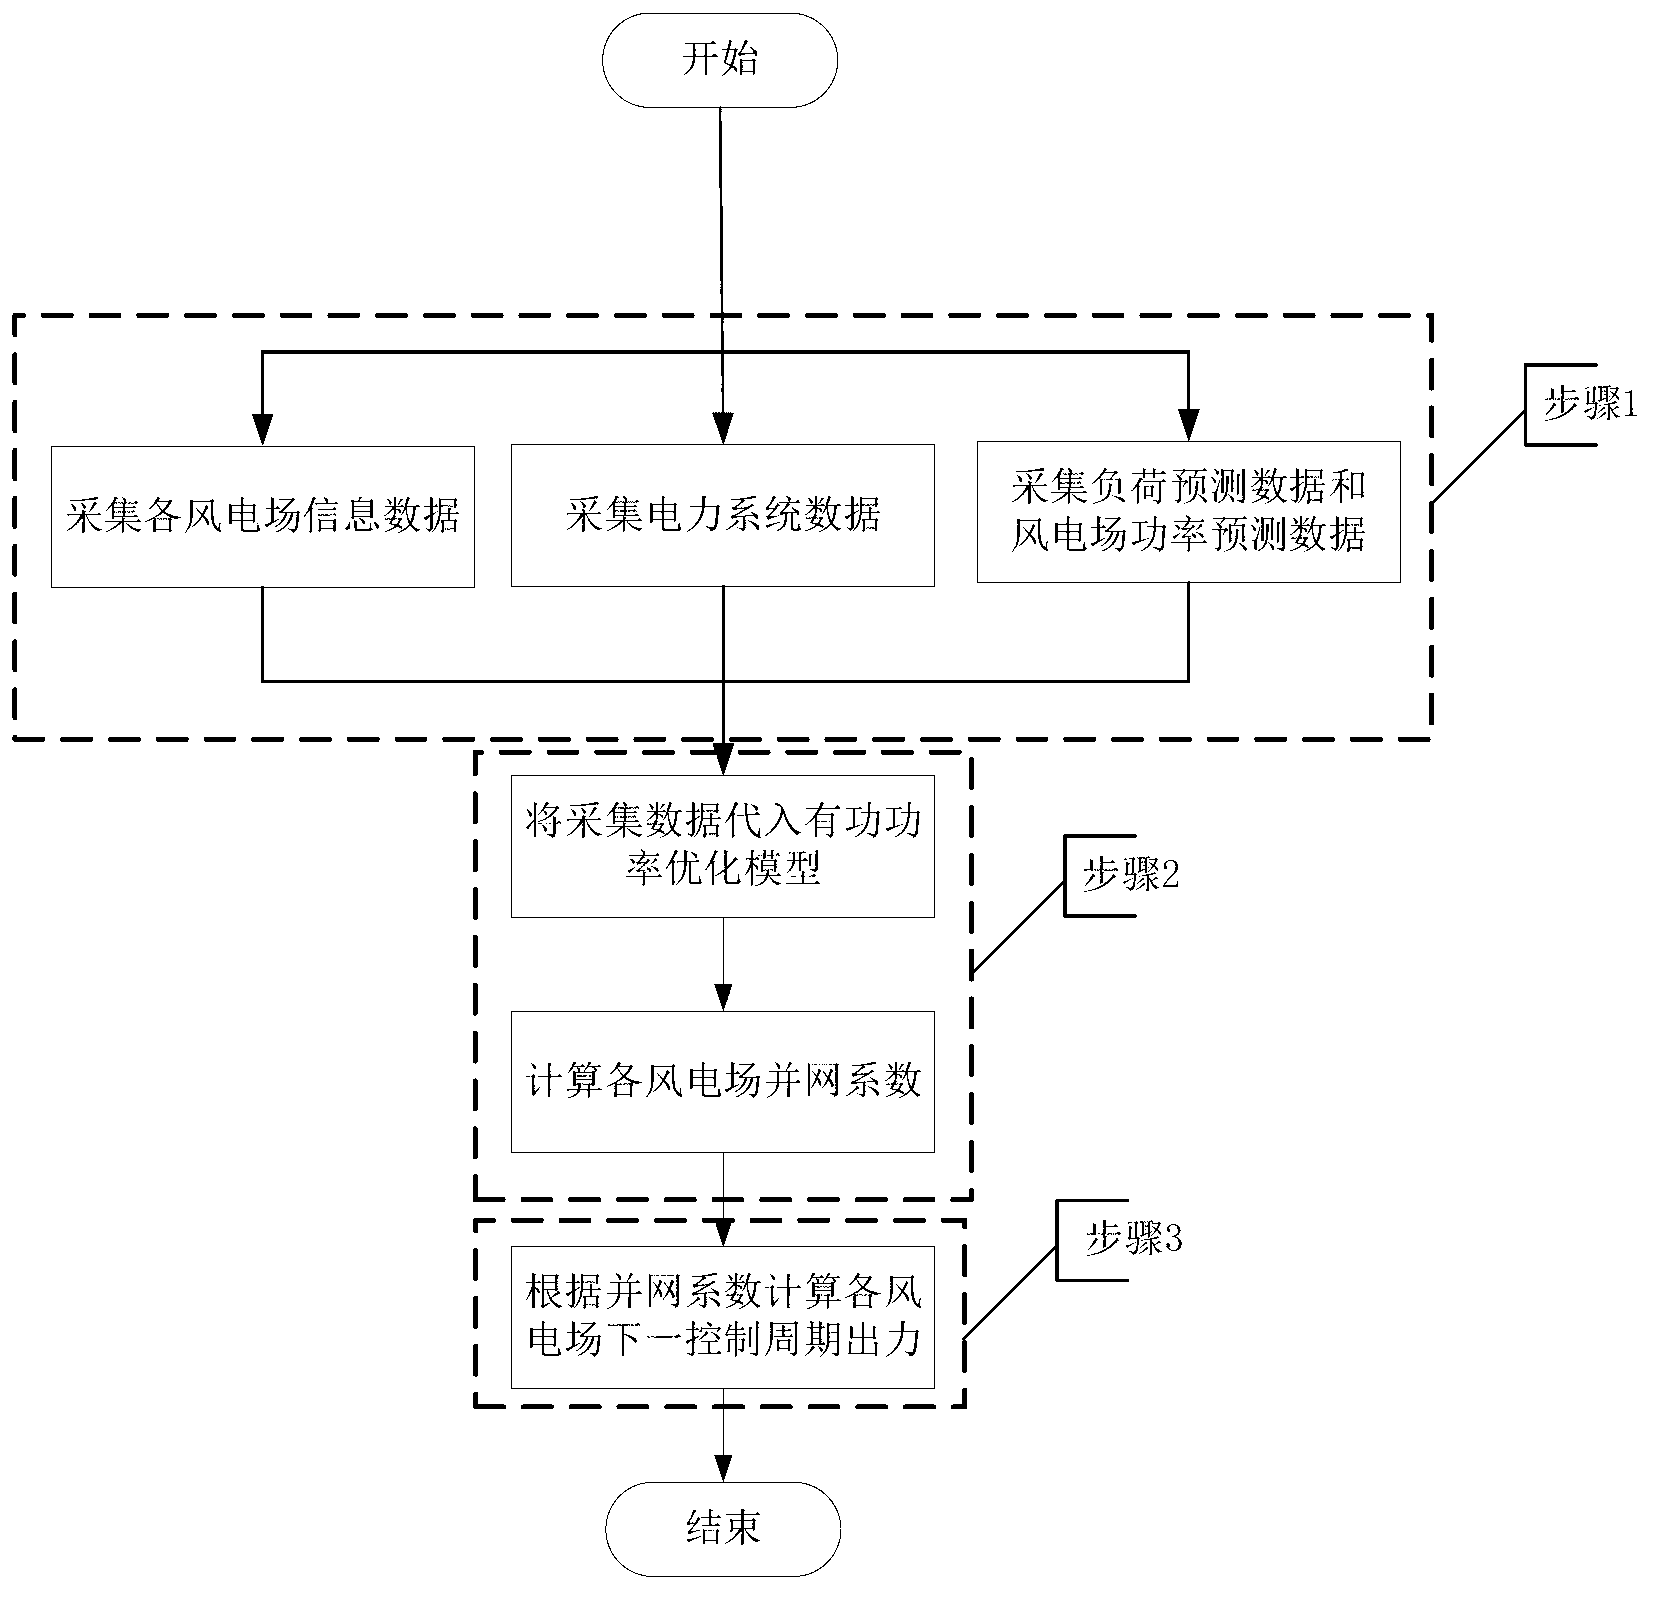 Control method of active power of clustered wind power plants